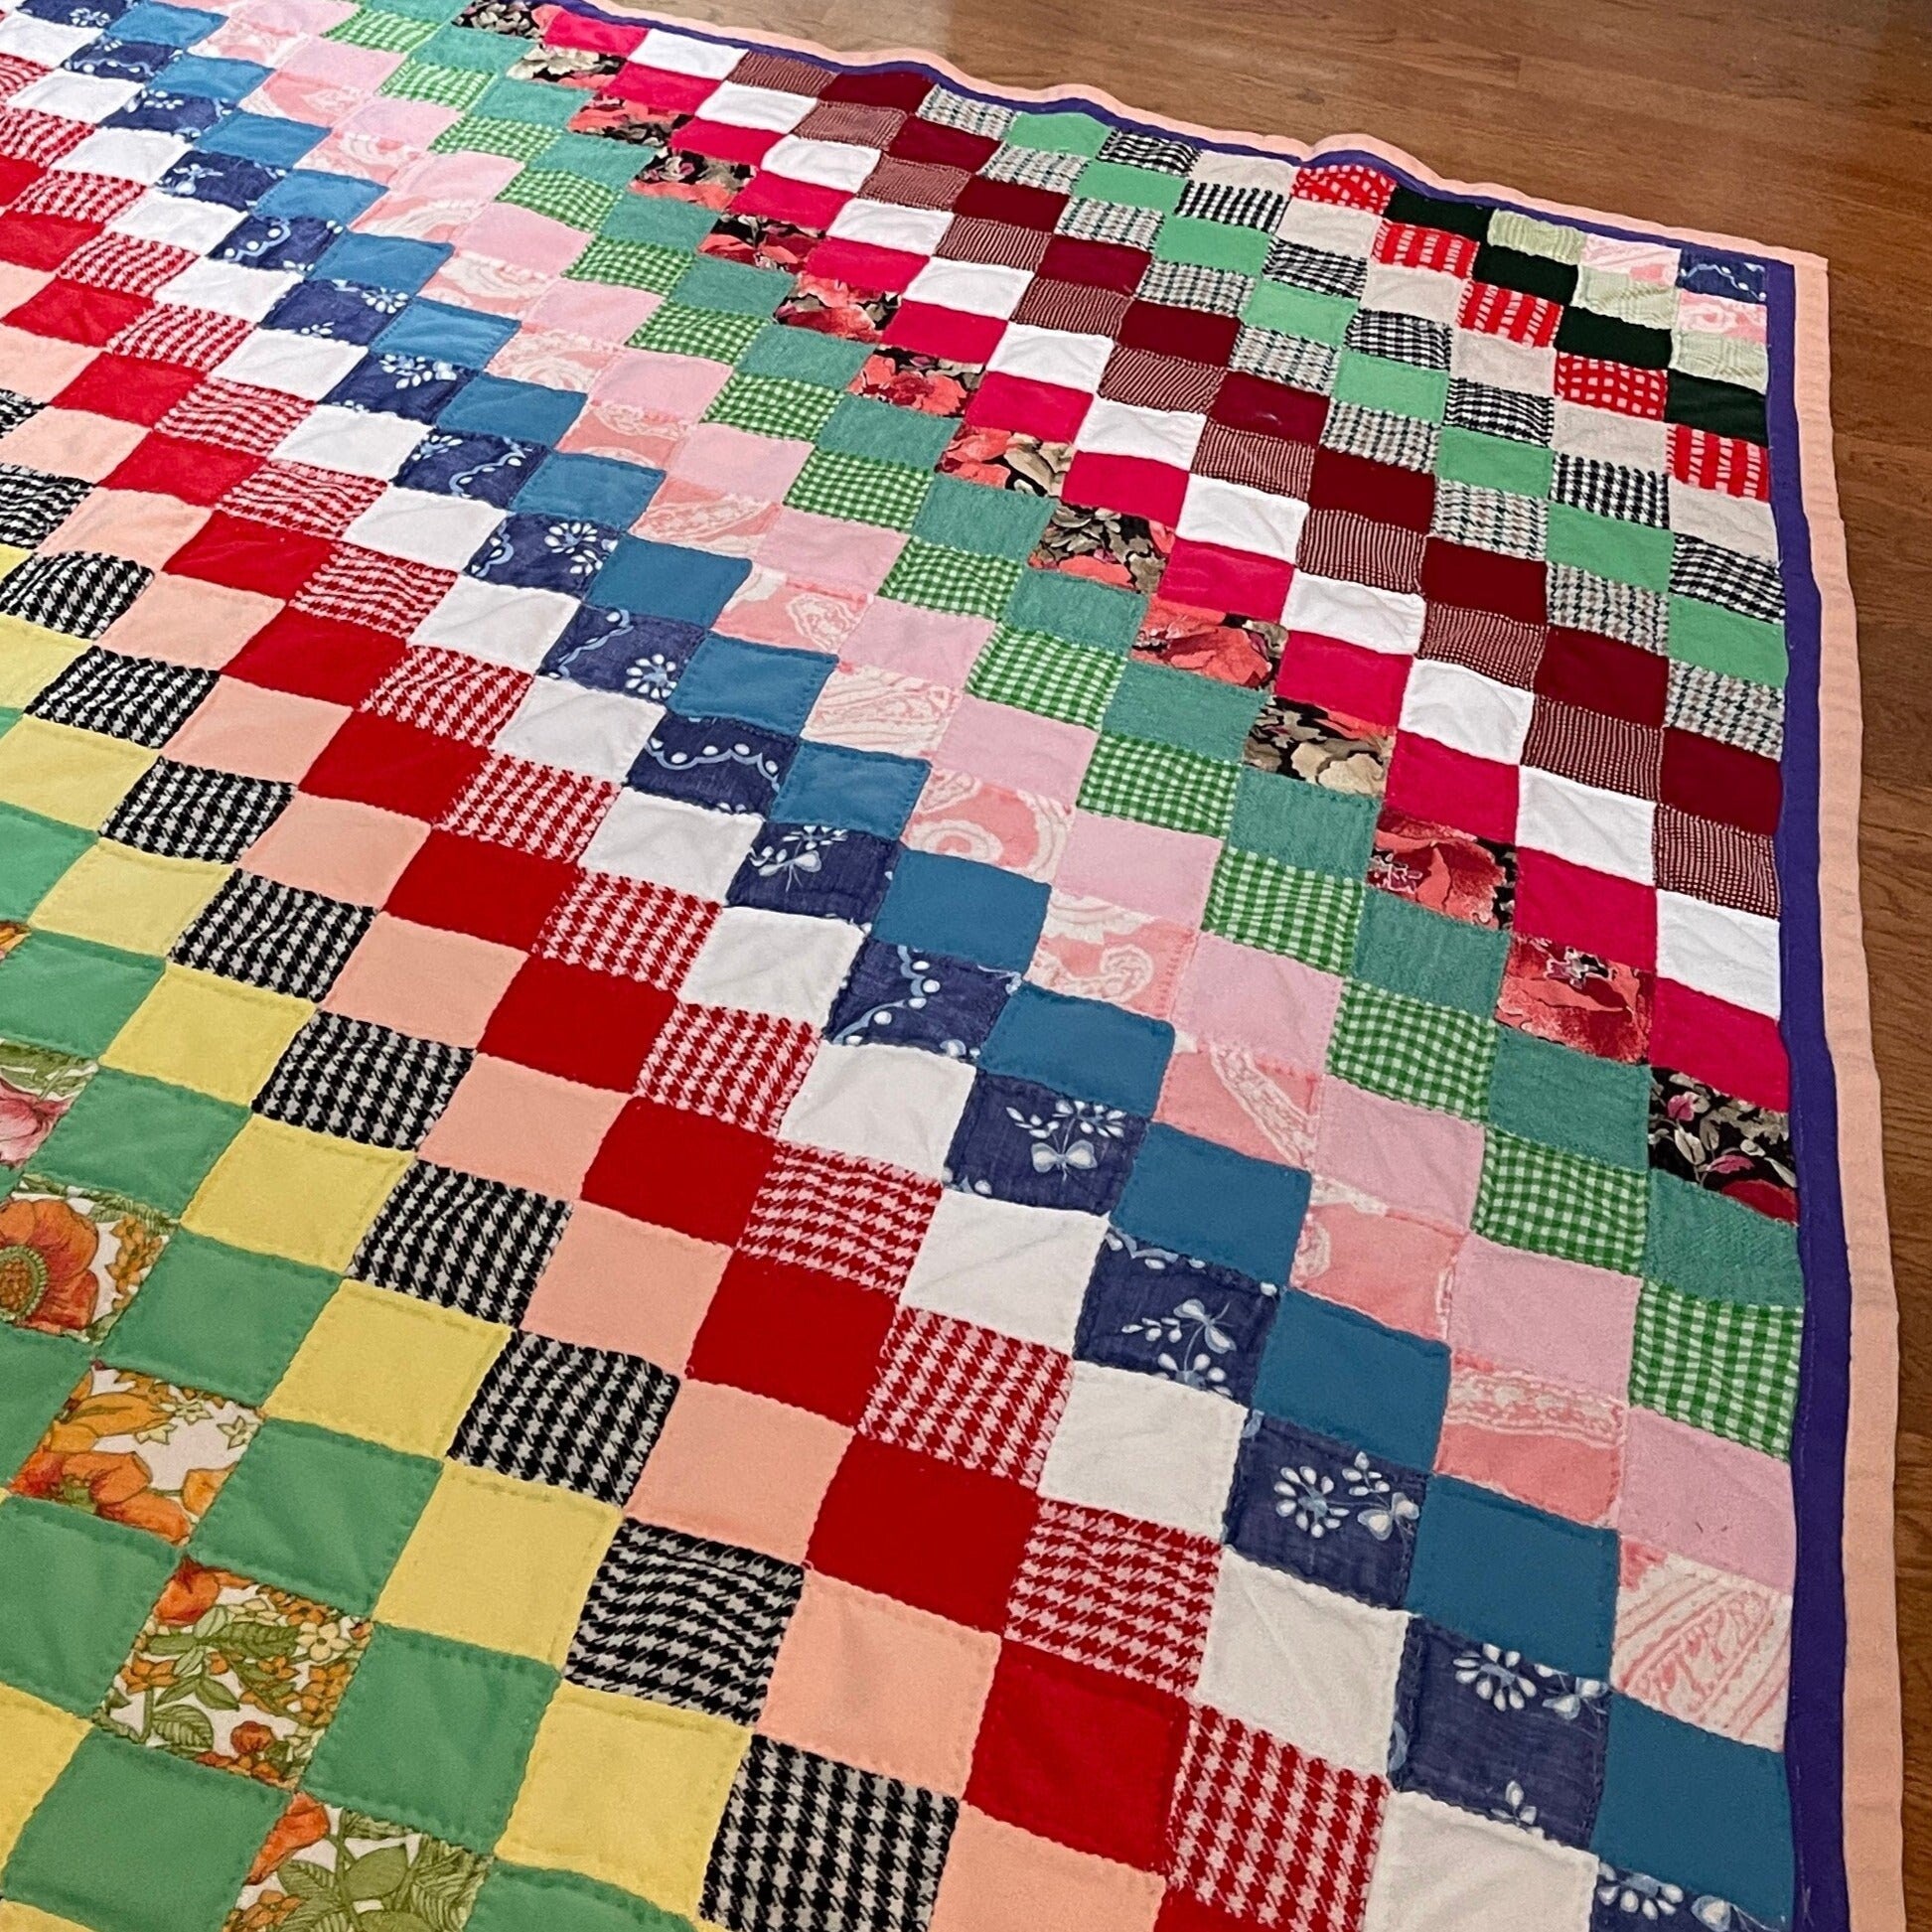 Spectacular hand made quilt vintage collectible heirloom 82 by 73 inch keepsake blanket see pictures